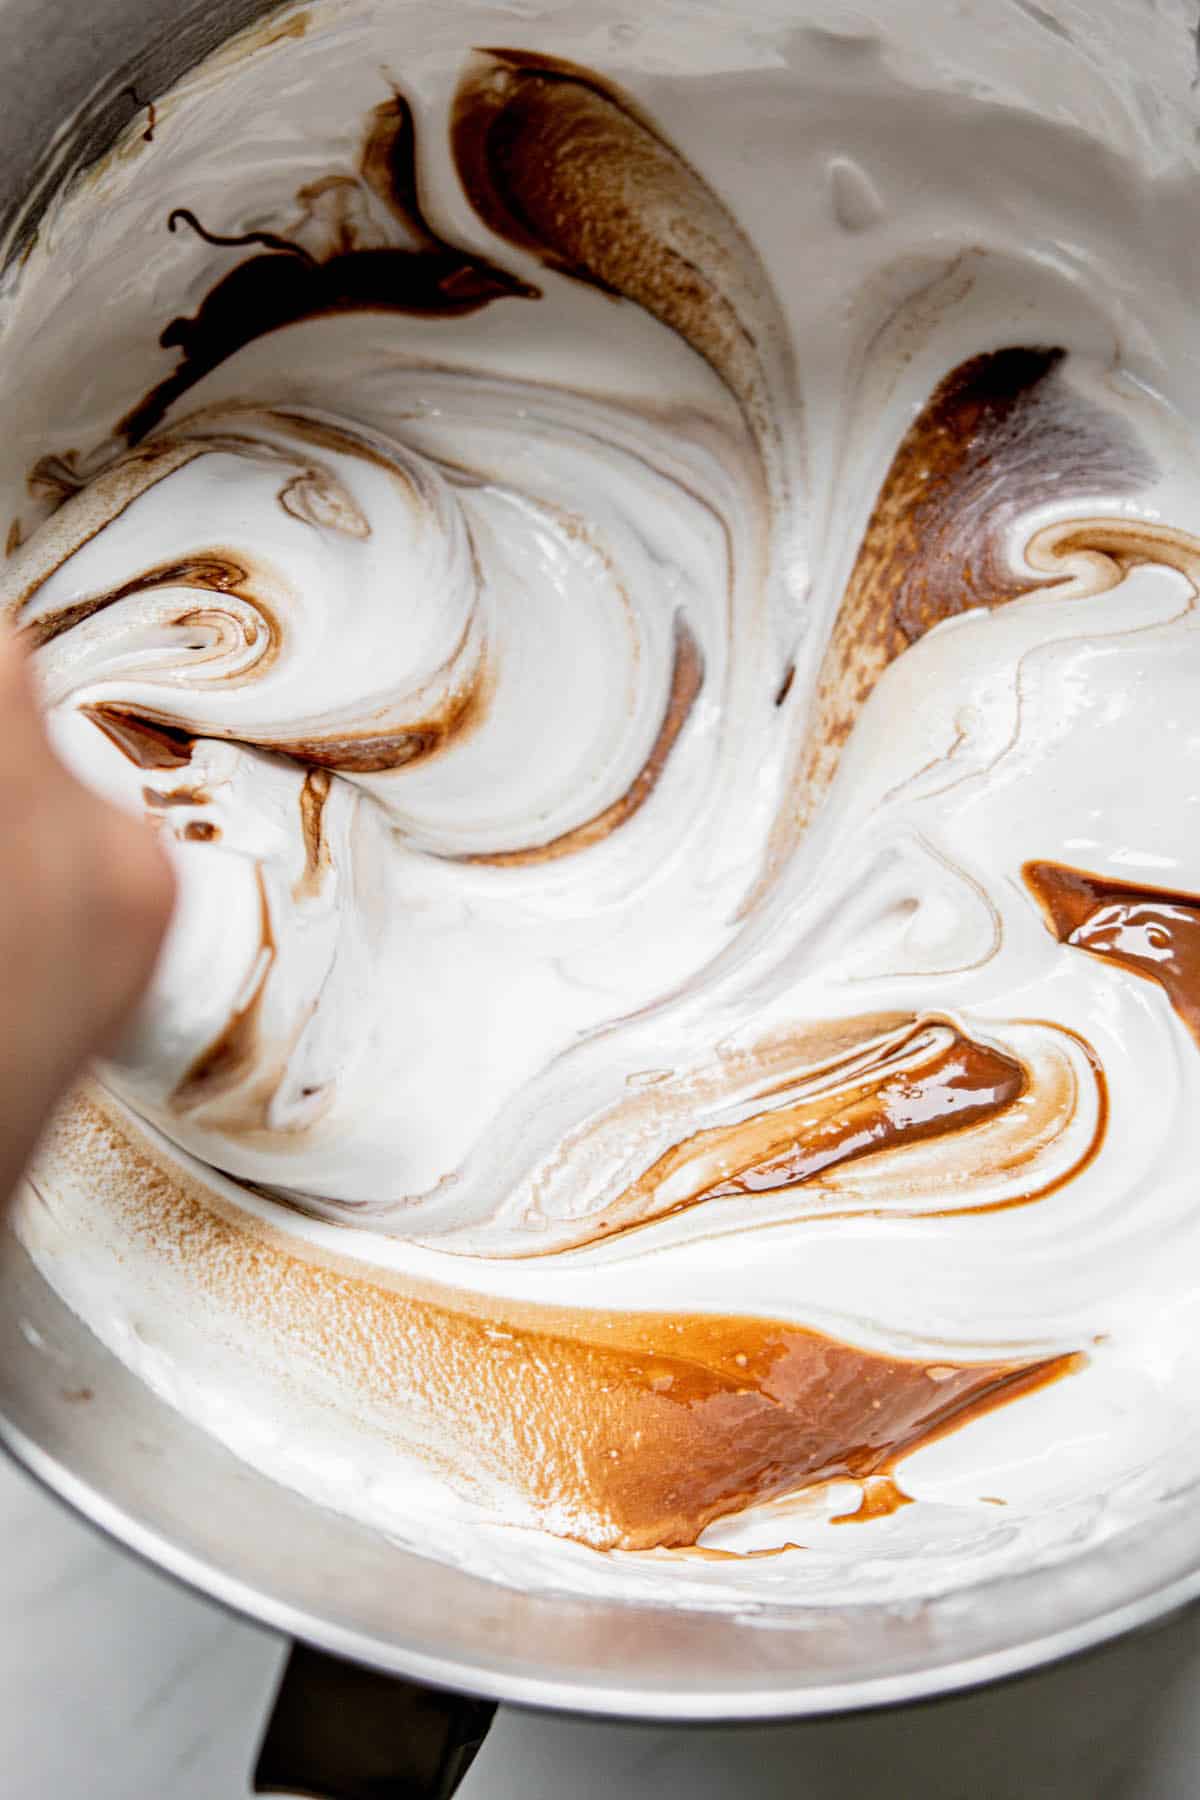 knife swirling chocolate into marshmallow.